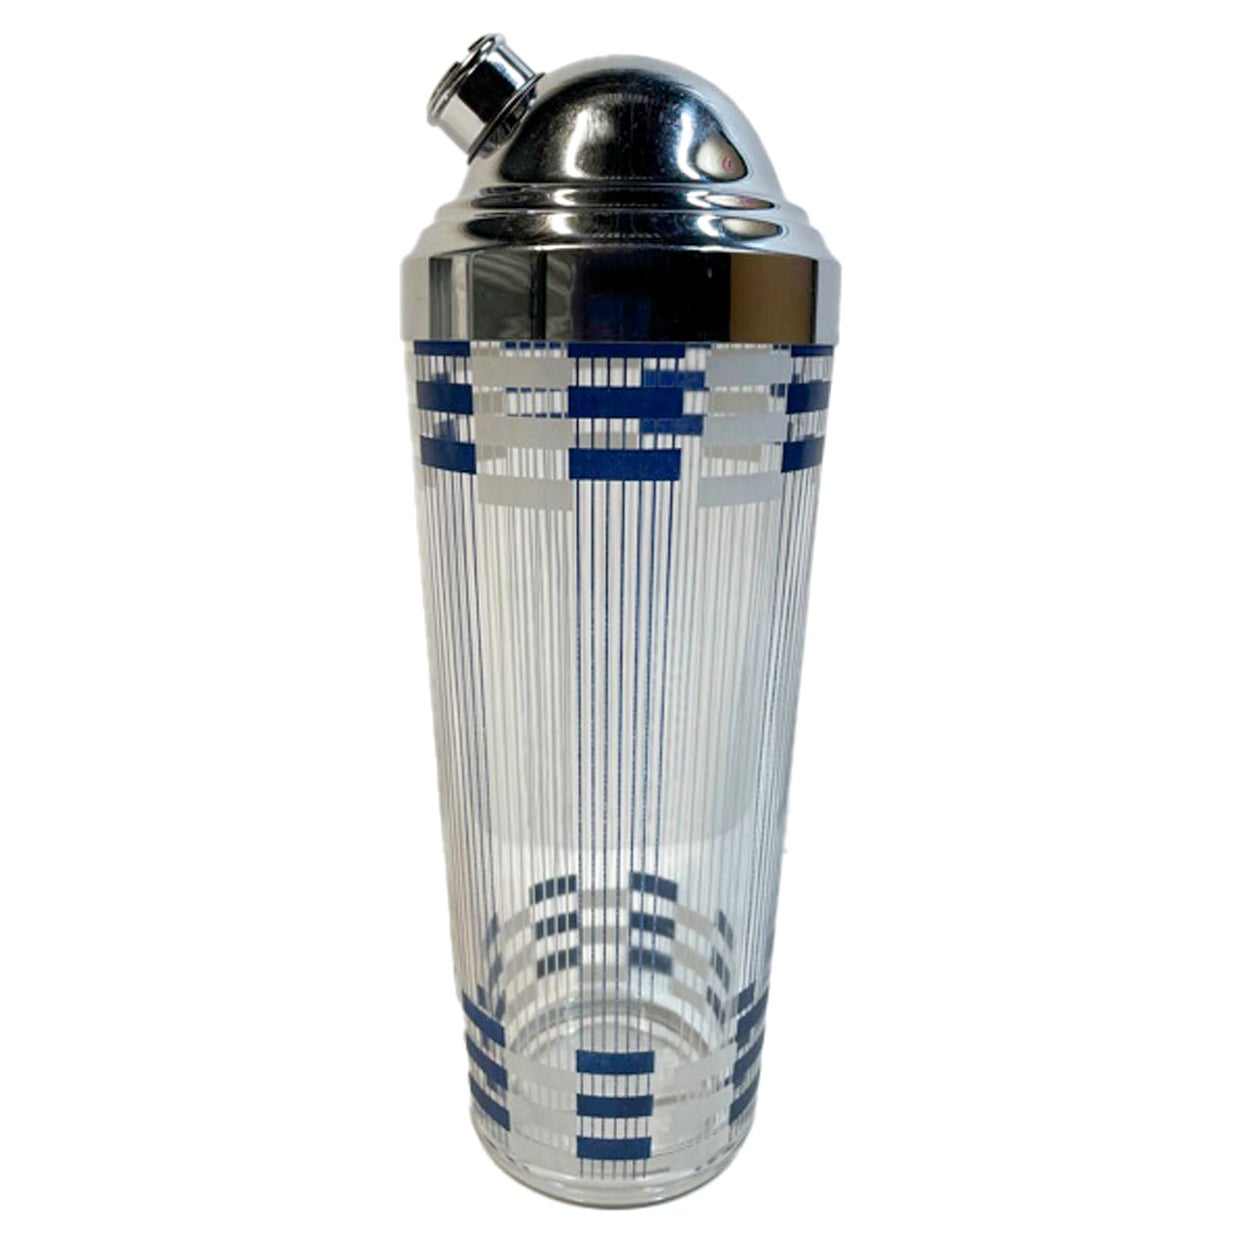 Art Deco Cocktail Shaker with Blue and White Bands and Stripes